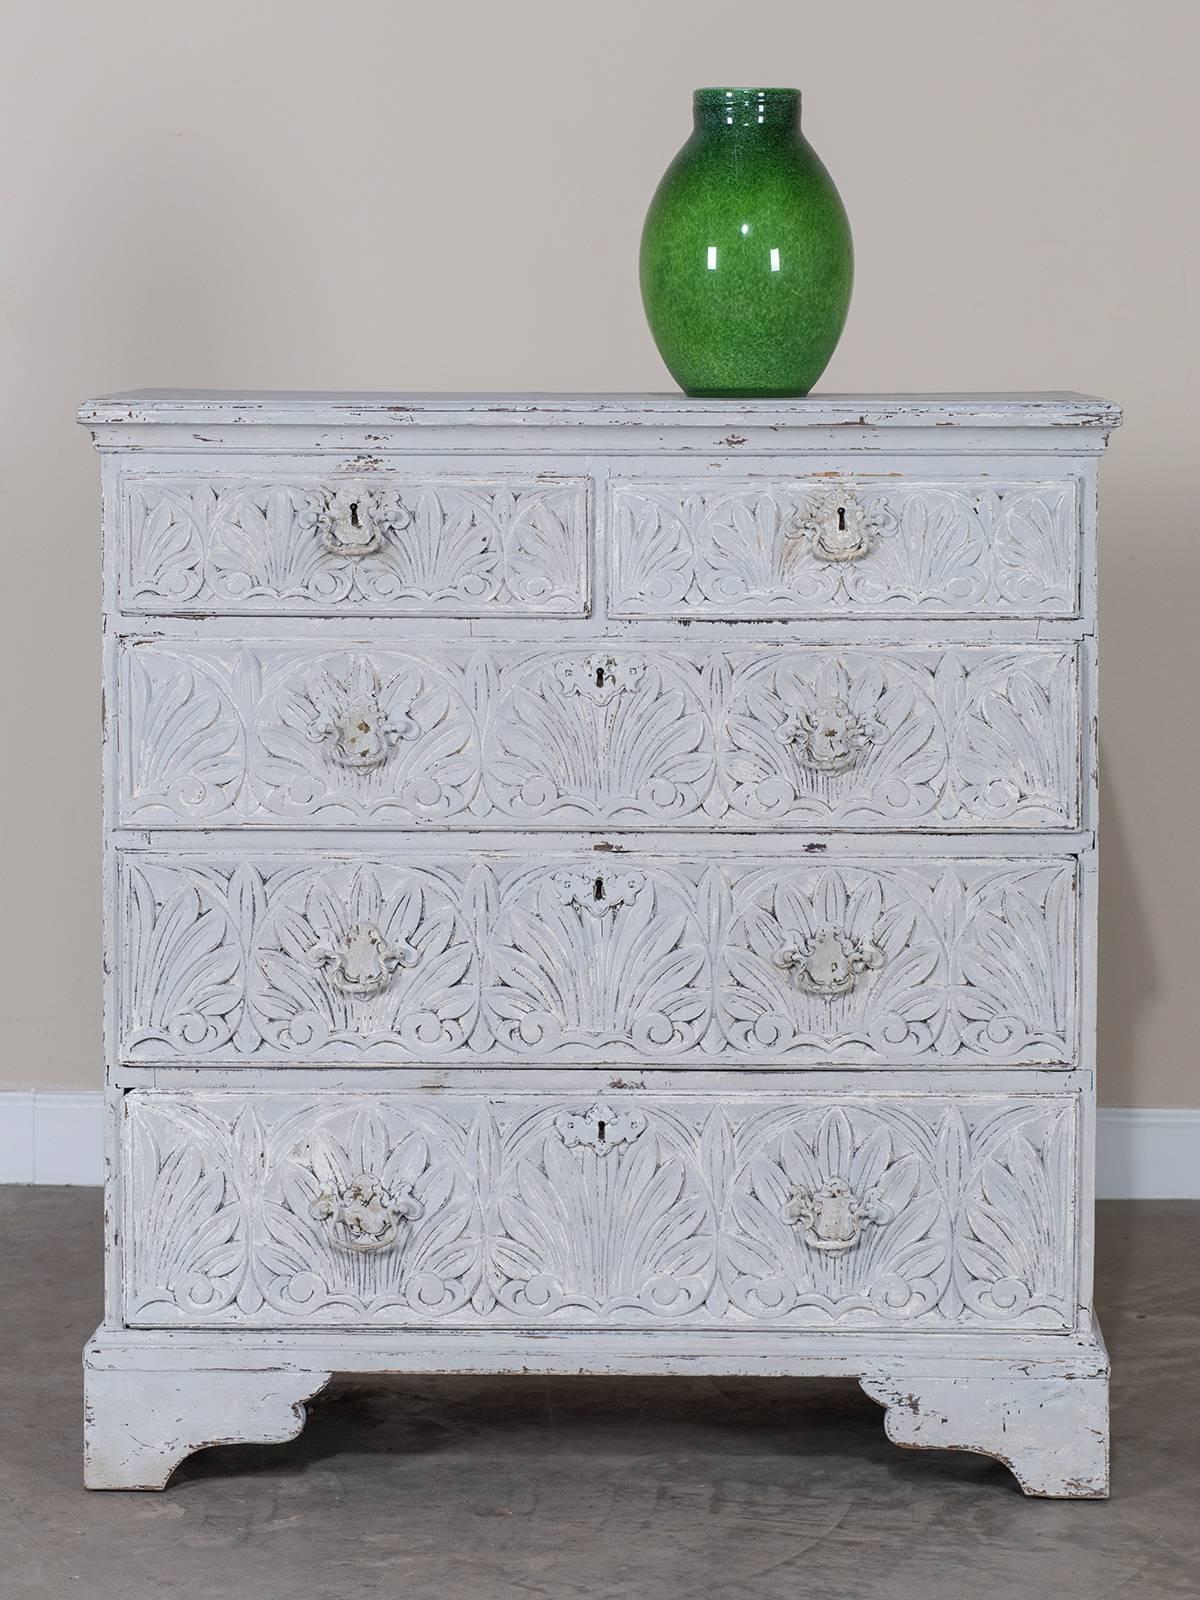 Receive our new selections direct from 1stdibs by email each week. Please click Follow Dealer below and see them first!

This antique English Jacobean oak chest chest of drawers circa 1840 has a fresh appearance due to the hand applied painted